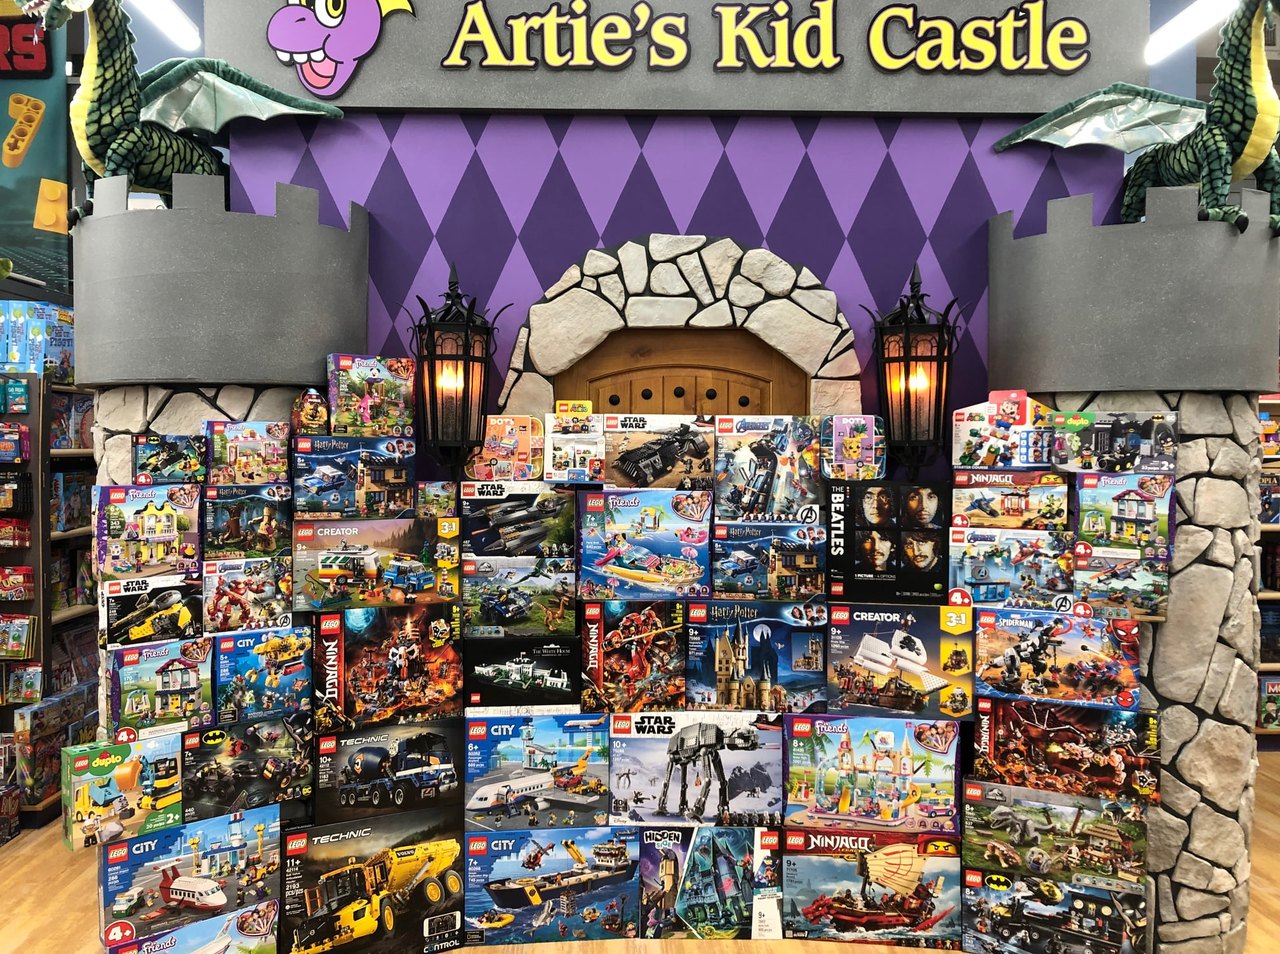   
																There’s A Castle-Themed Toy Store In Ohio And It’s Royally Awesome 
															 